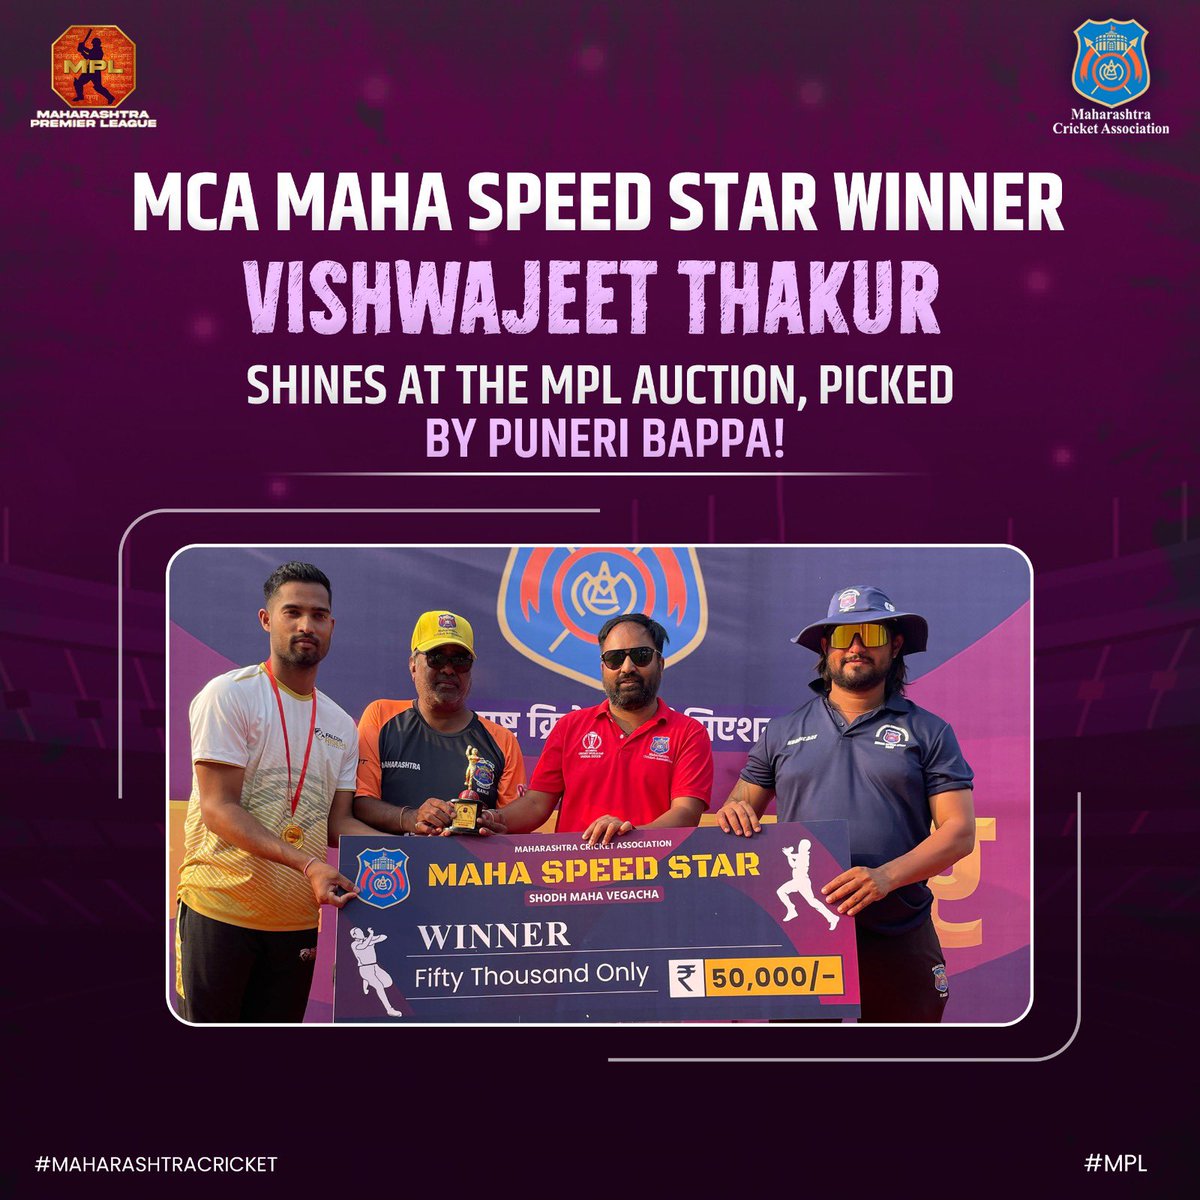 From Maha Speed Star’s winner to Puneri Bappa’s auction pick! Vishwajeet Thakur is all set to light up the MPL with his brilliance. #MPLAuction #PuneriBappa #VishwajeetThakur #FastBowler #MahaSpeedStar